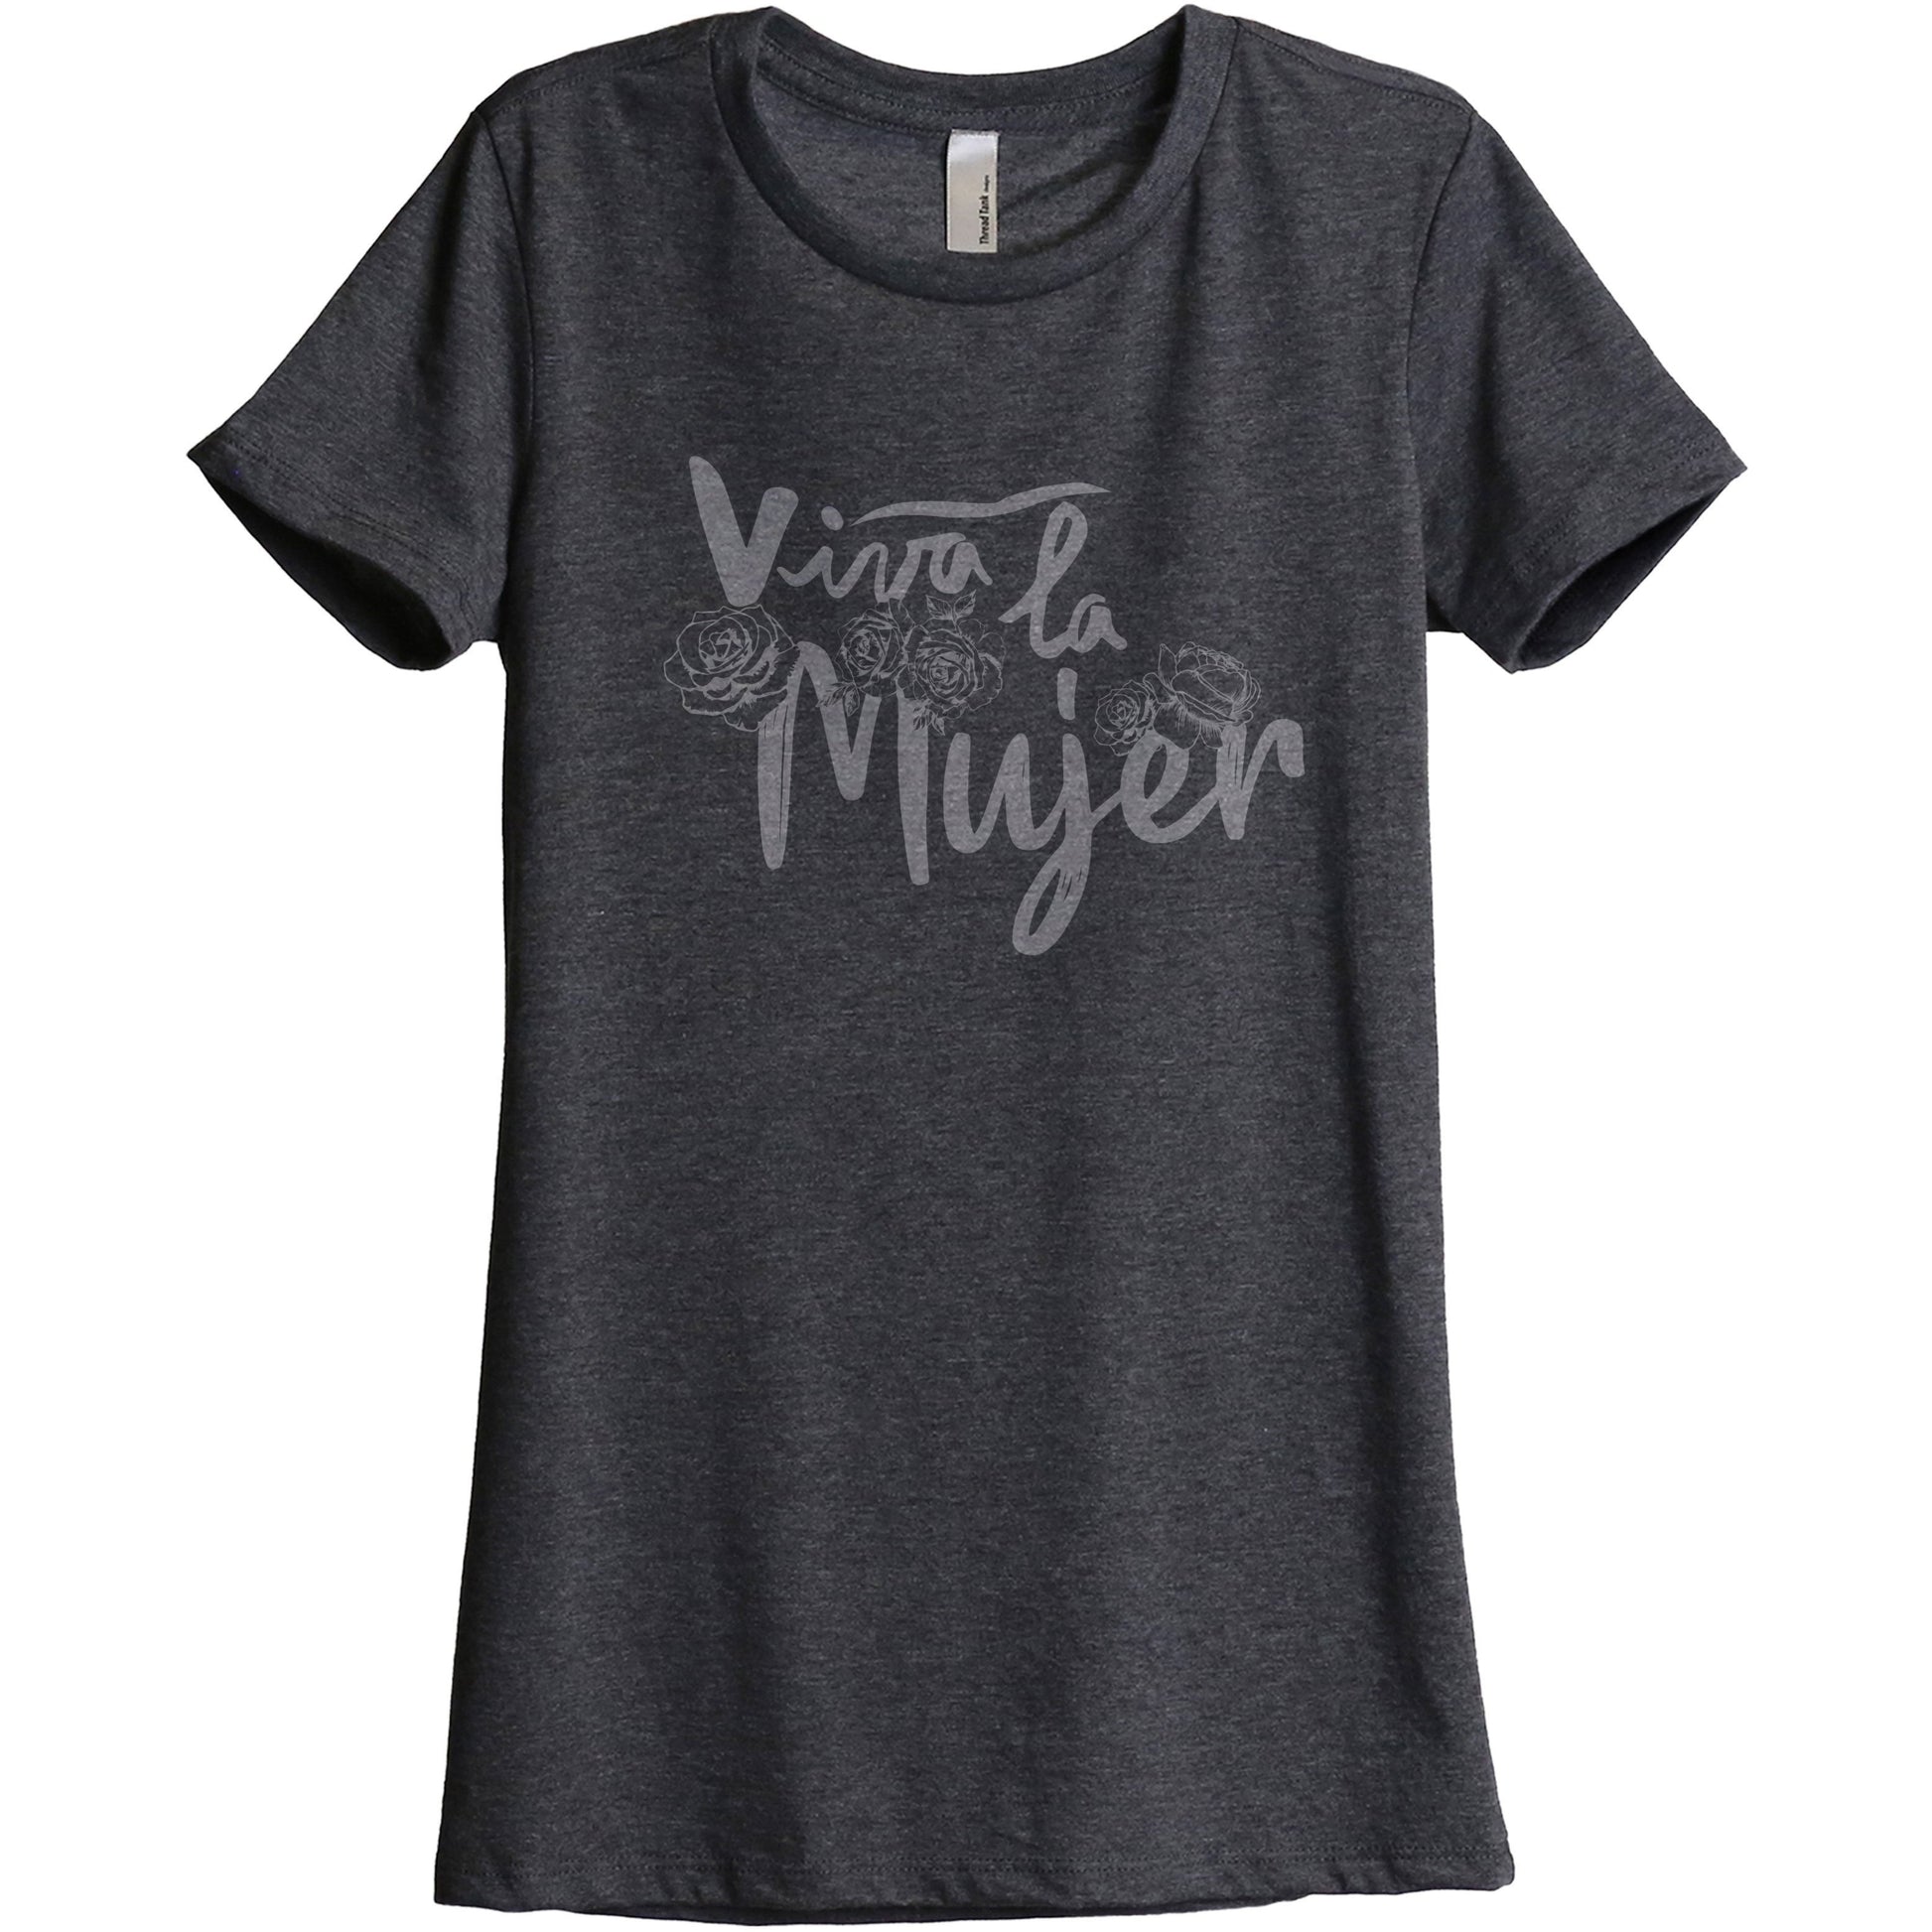 Viva La Mujer - Stories You Can Wear by Thread Tank